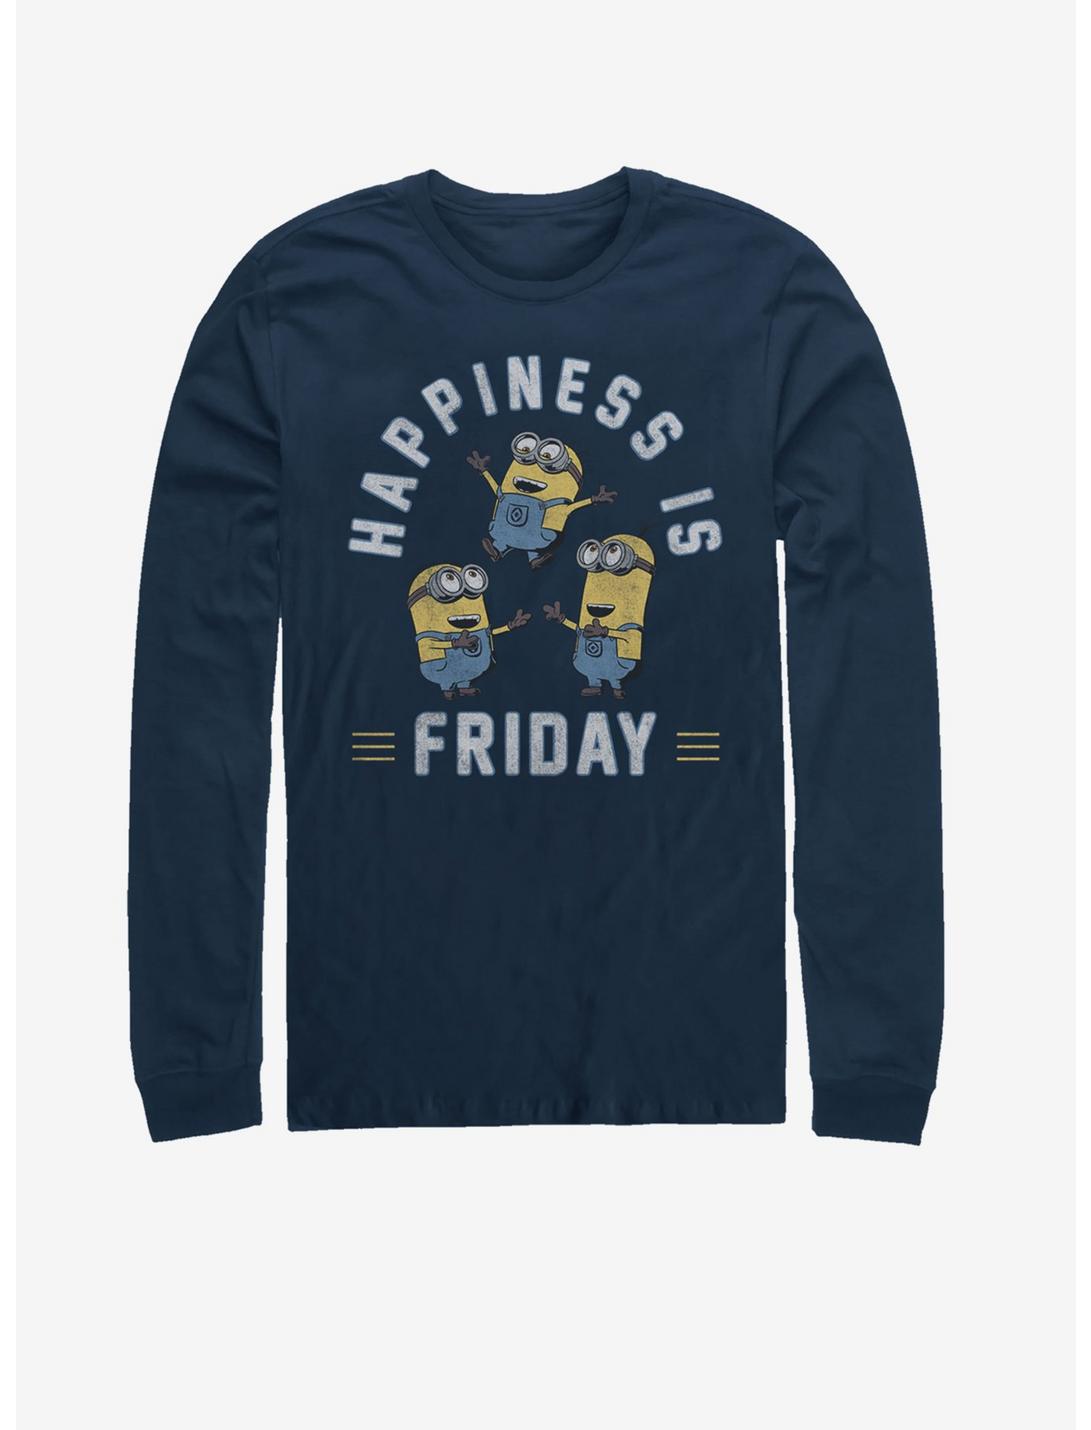 Universal Minion Happiness Is Friday Long-Sleeve T-Shirt, NAVY, hi-res